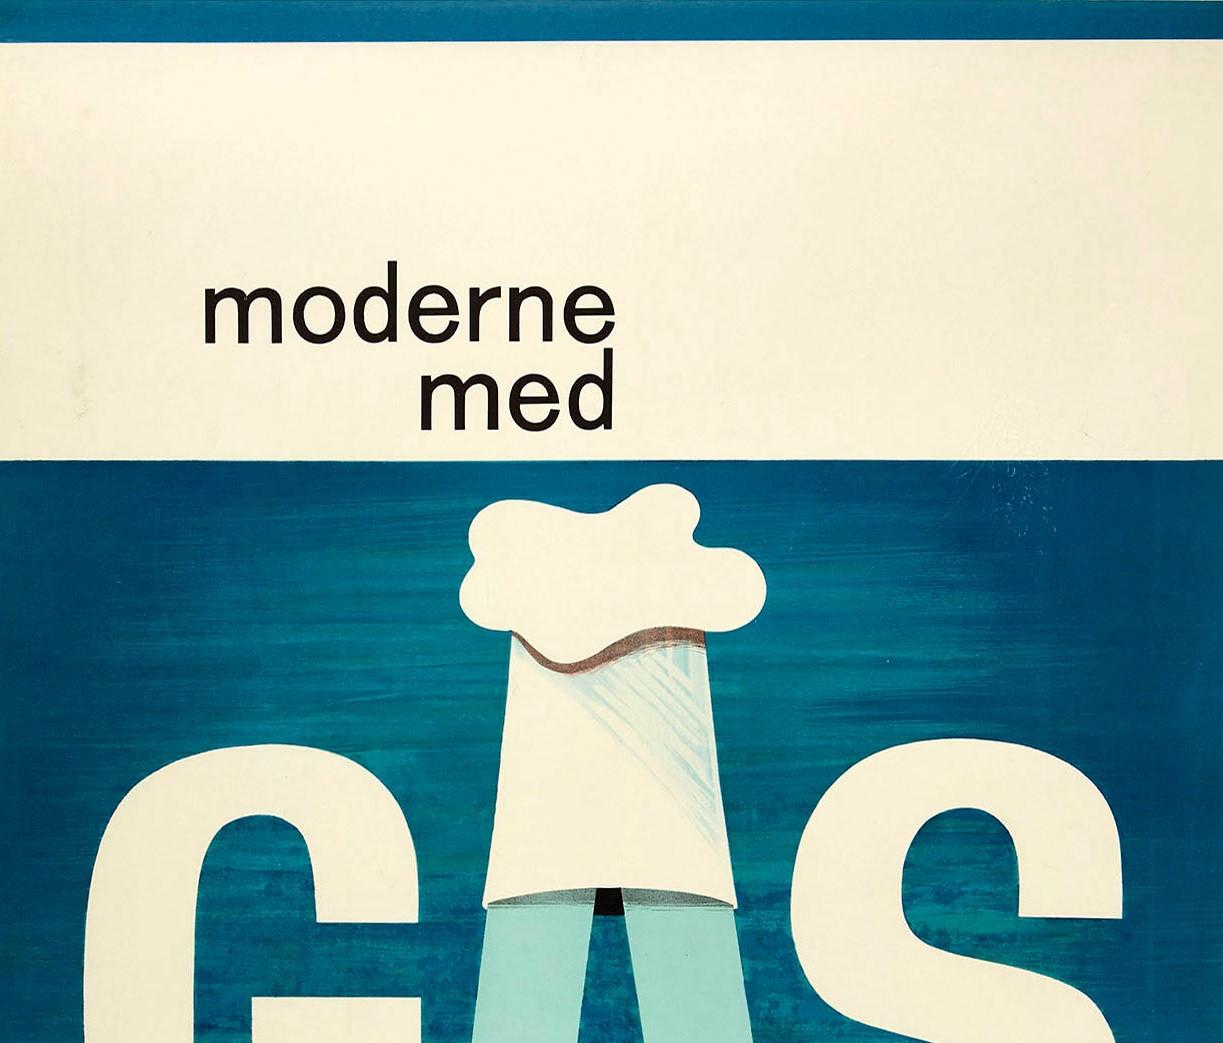 Original vintage mid-century modern advertising poster promoting Moderne Med Gas / Modern With Gas featuring a great design showing the steam from a saucepan rising from the side of the red lid to the bold lettering above, a chef hat on the A in